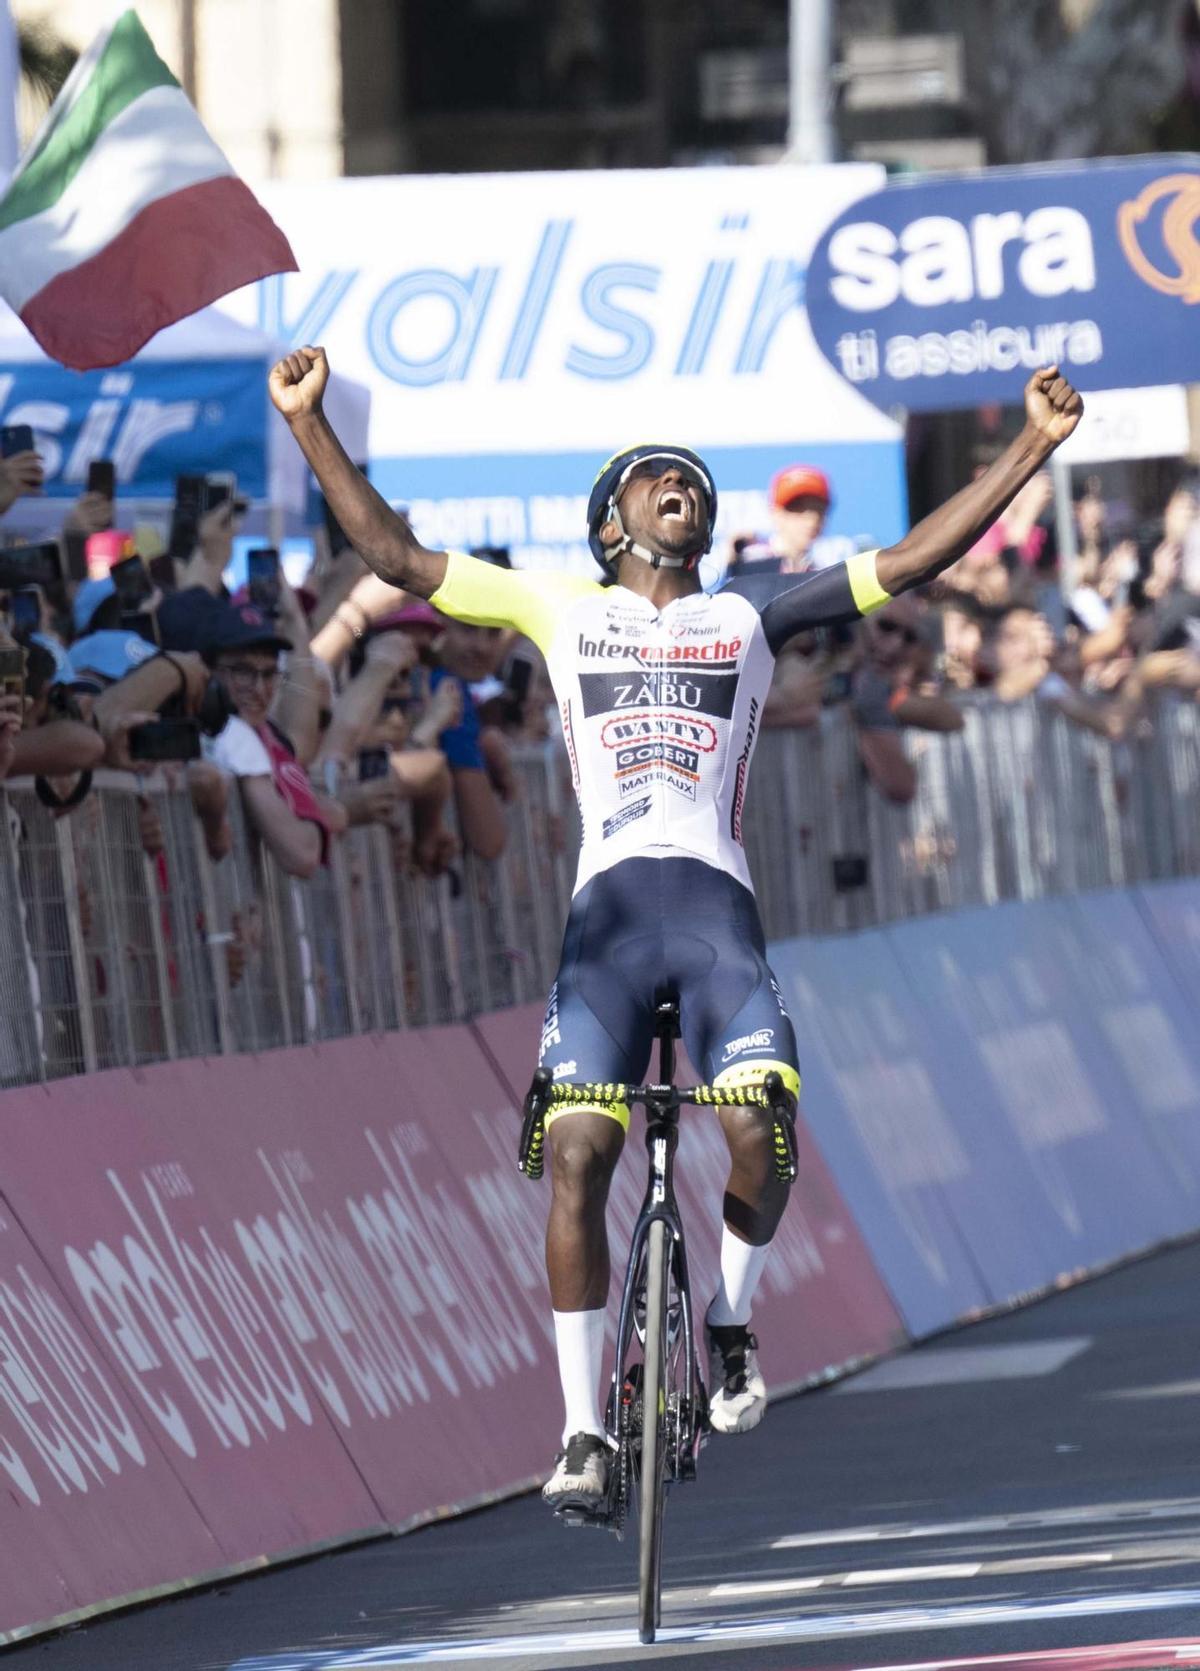 Jesi (Italy), 17/05/2022.- Eritrean rider Biniam Girmay of Team Intermarche-Wanty-Gobert Materiaux celebrates as he crosses the finish line to win the 10th stage of the Giro d’Italia 2022 cycling race, over 196km between Pescara and Jesi, central Italy, 17 May 2022. (Ciclismo, Italia) EFE/EPA/MAURIZIO BRAMBATTI